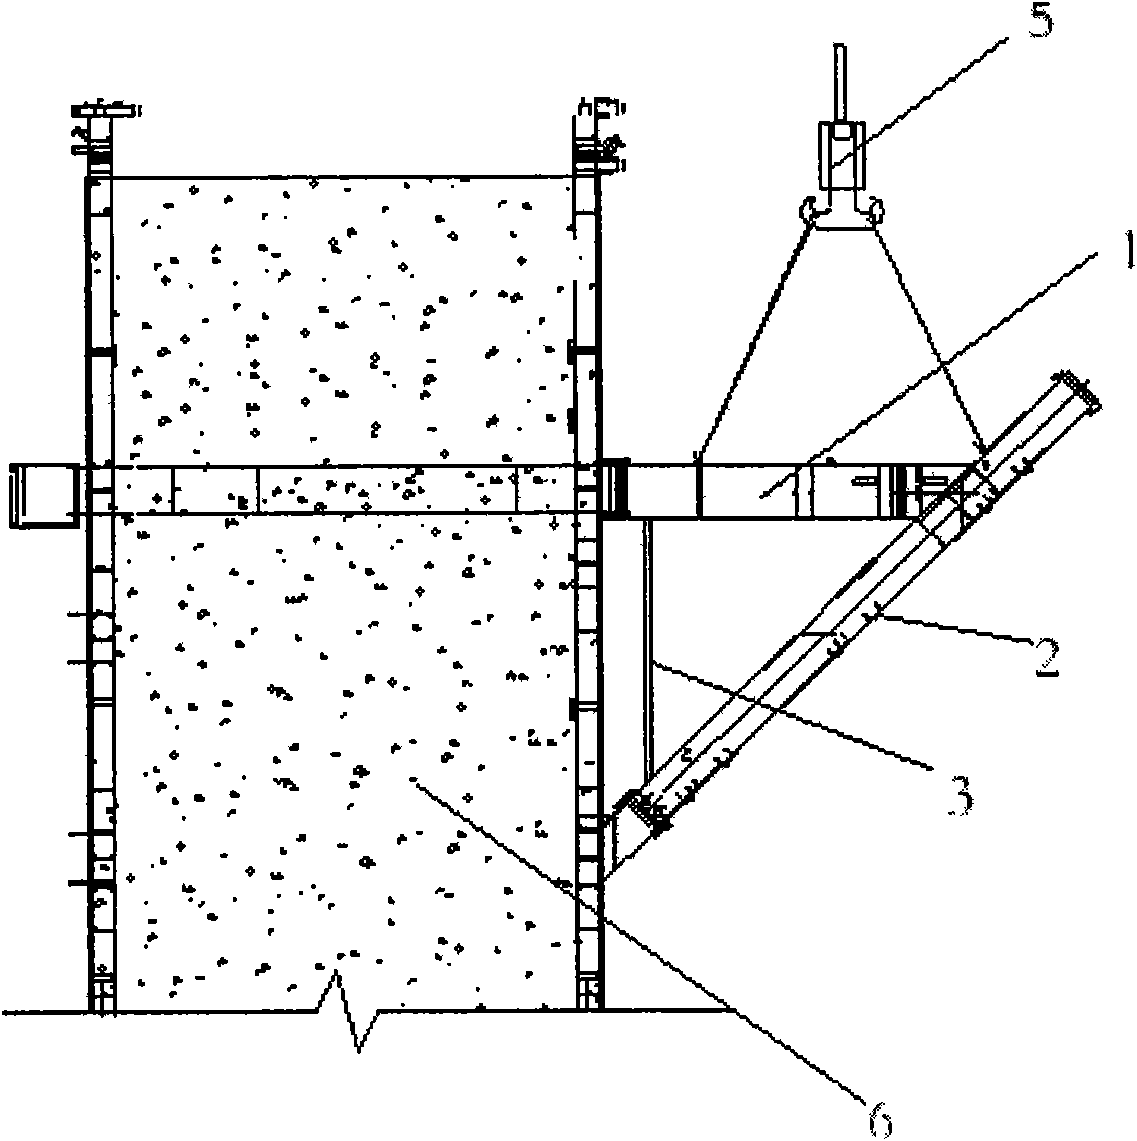 Layer-by-layer overhanging structure lifting method